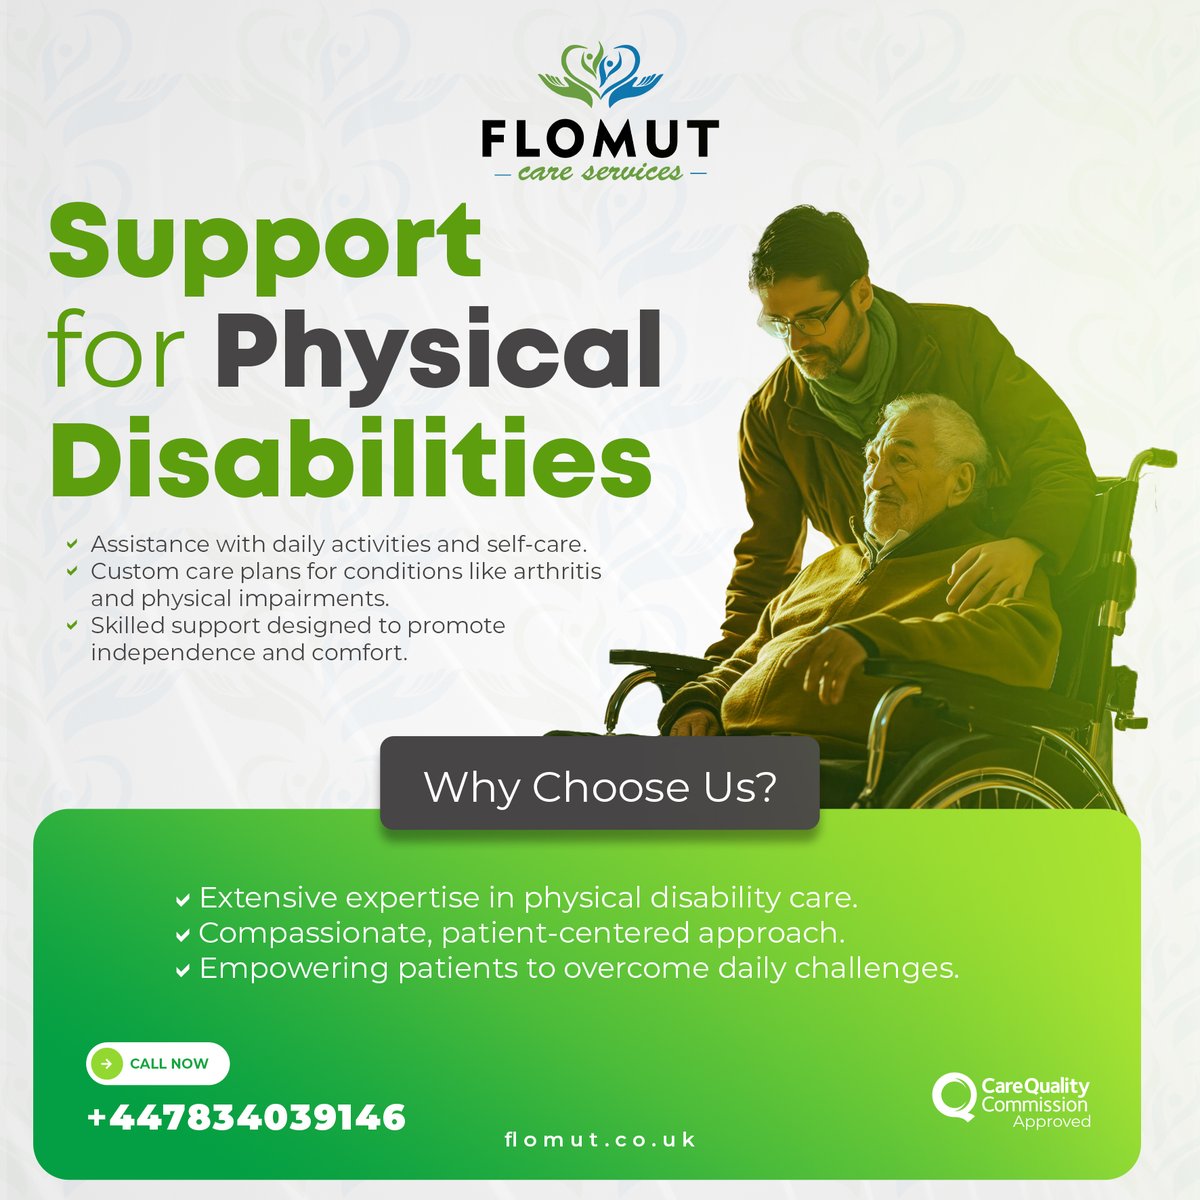 Enhance your daily life with our compassionate and customized services, designed specifically for individuals with dementia and physical disabilities. Visit flomut.co.uk to learn how we can support you in creating a brighter and more fulfilling life.